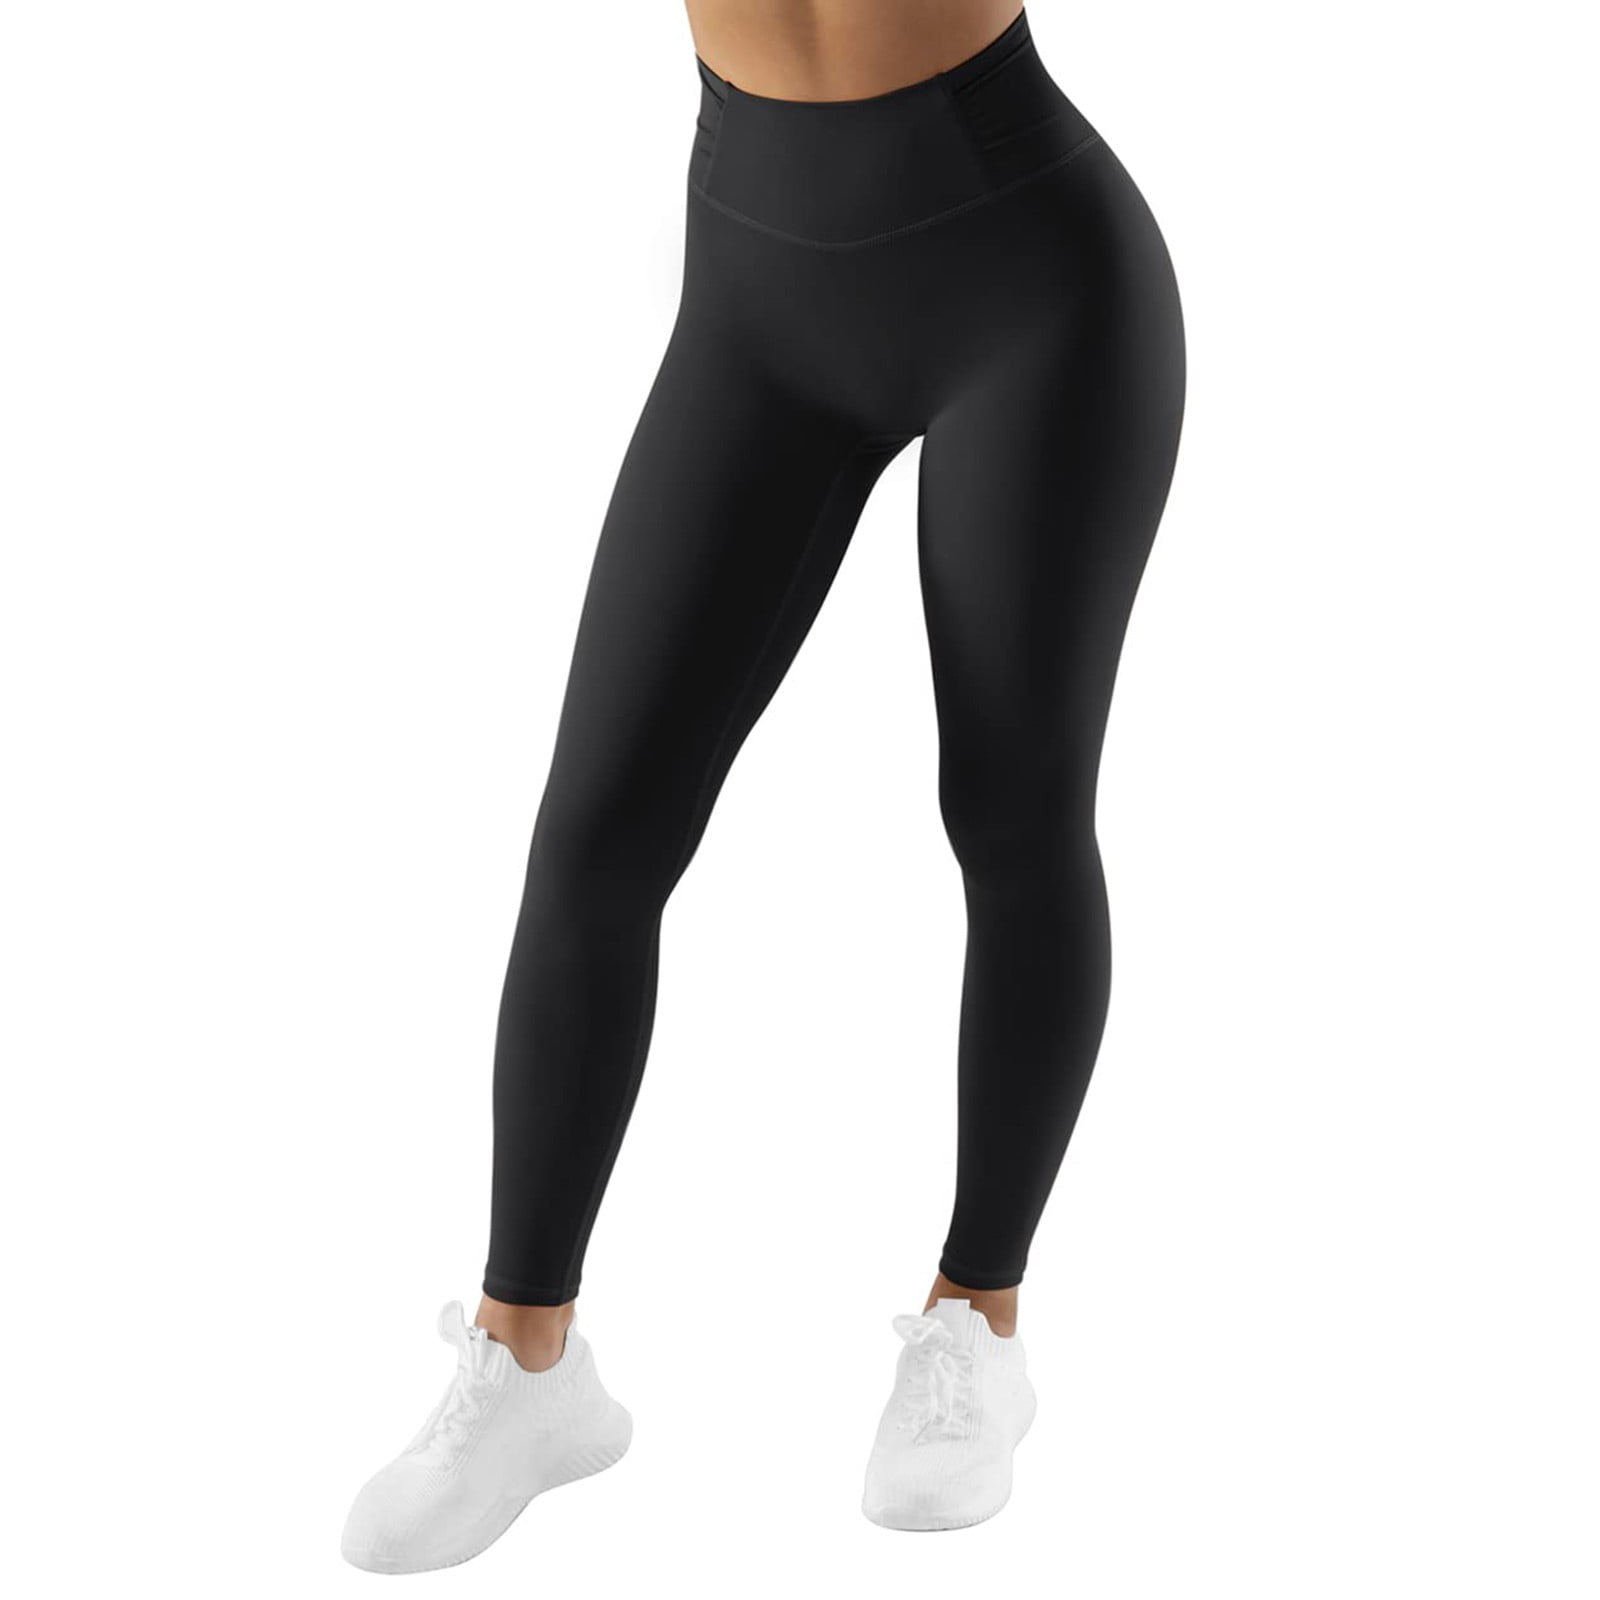 oieyuz High Waisted Corset Leggings for Women Athletic Motion